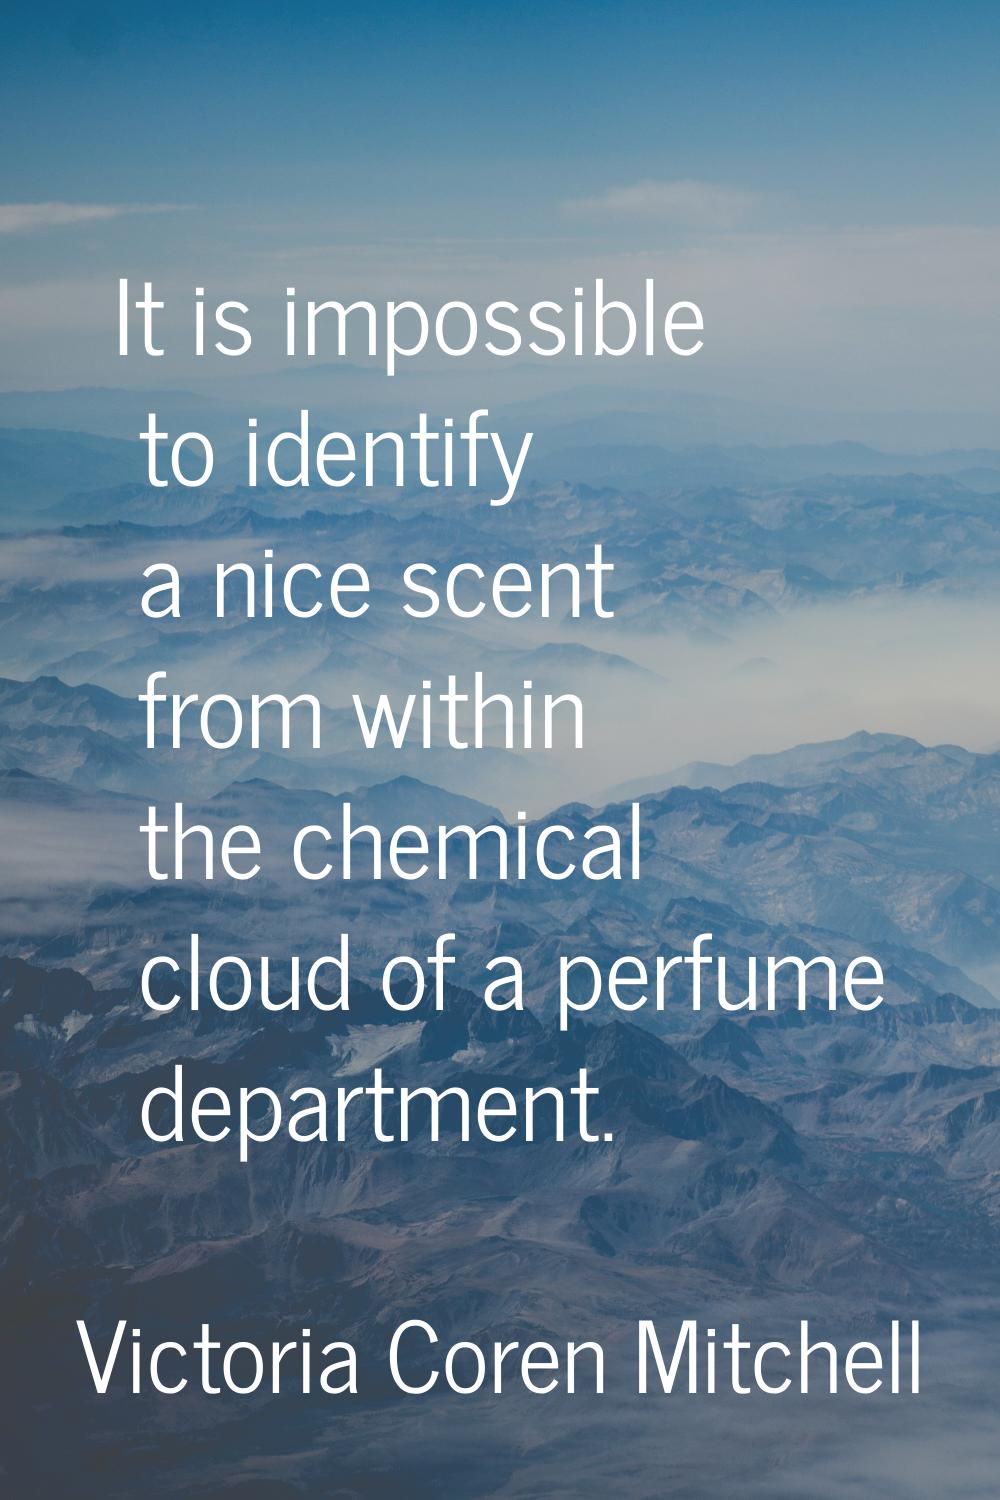 It is impossible to identify a nice scent from within the chemical cloud of a perfume department.